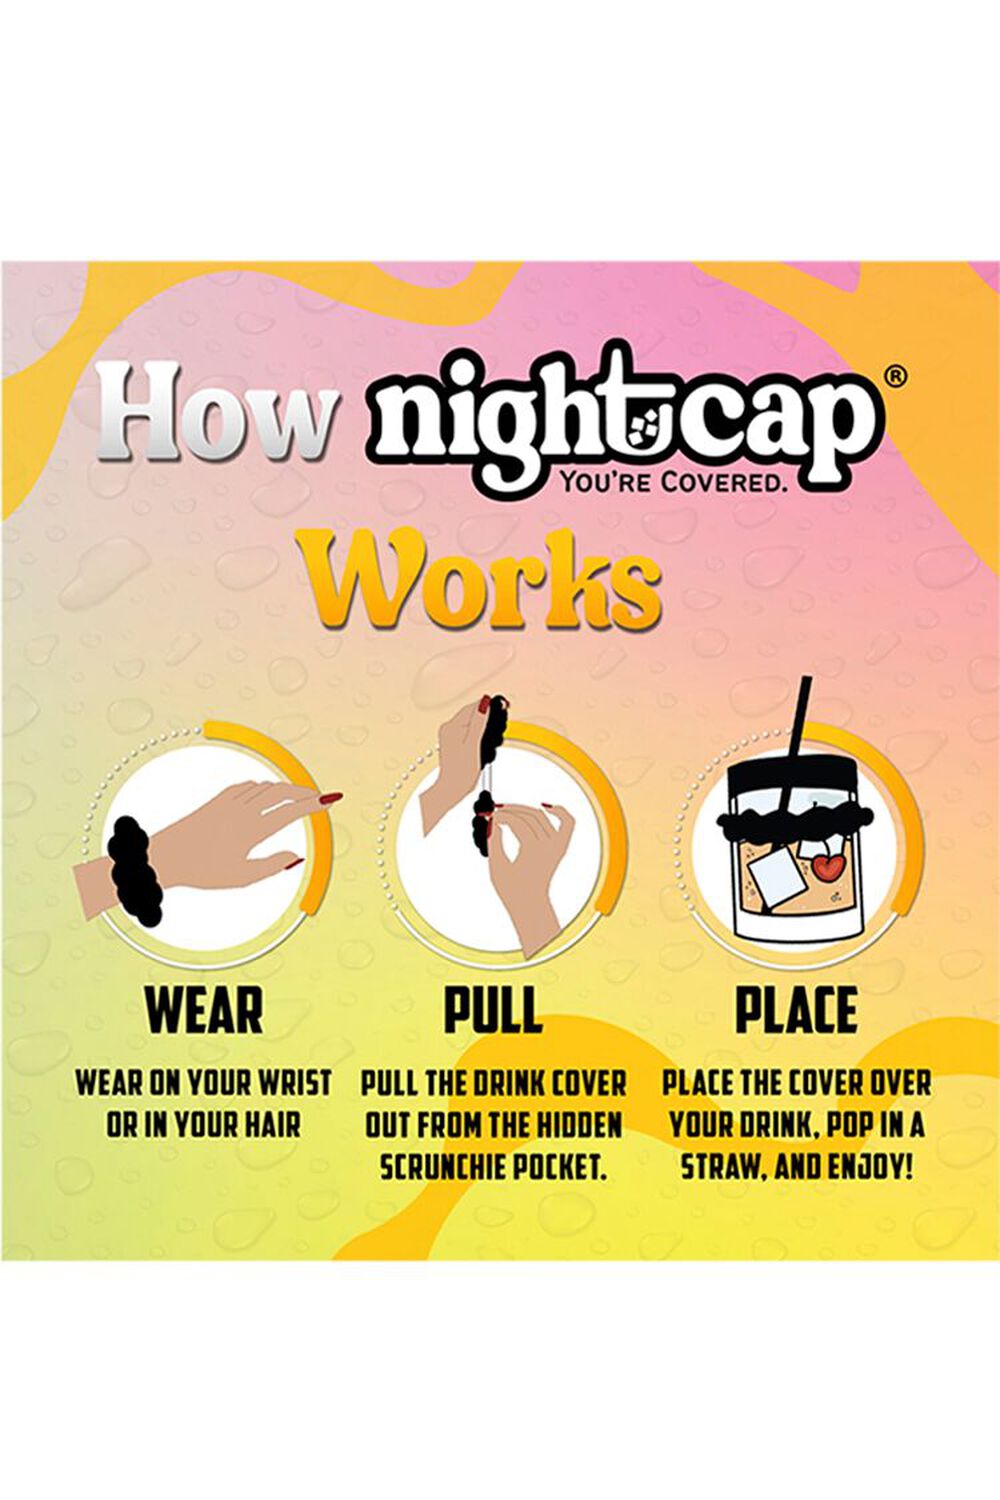 NIGHTCAP Drink Spike Prevention Cover 